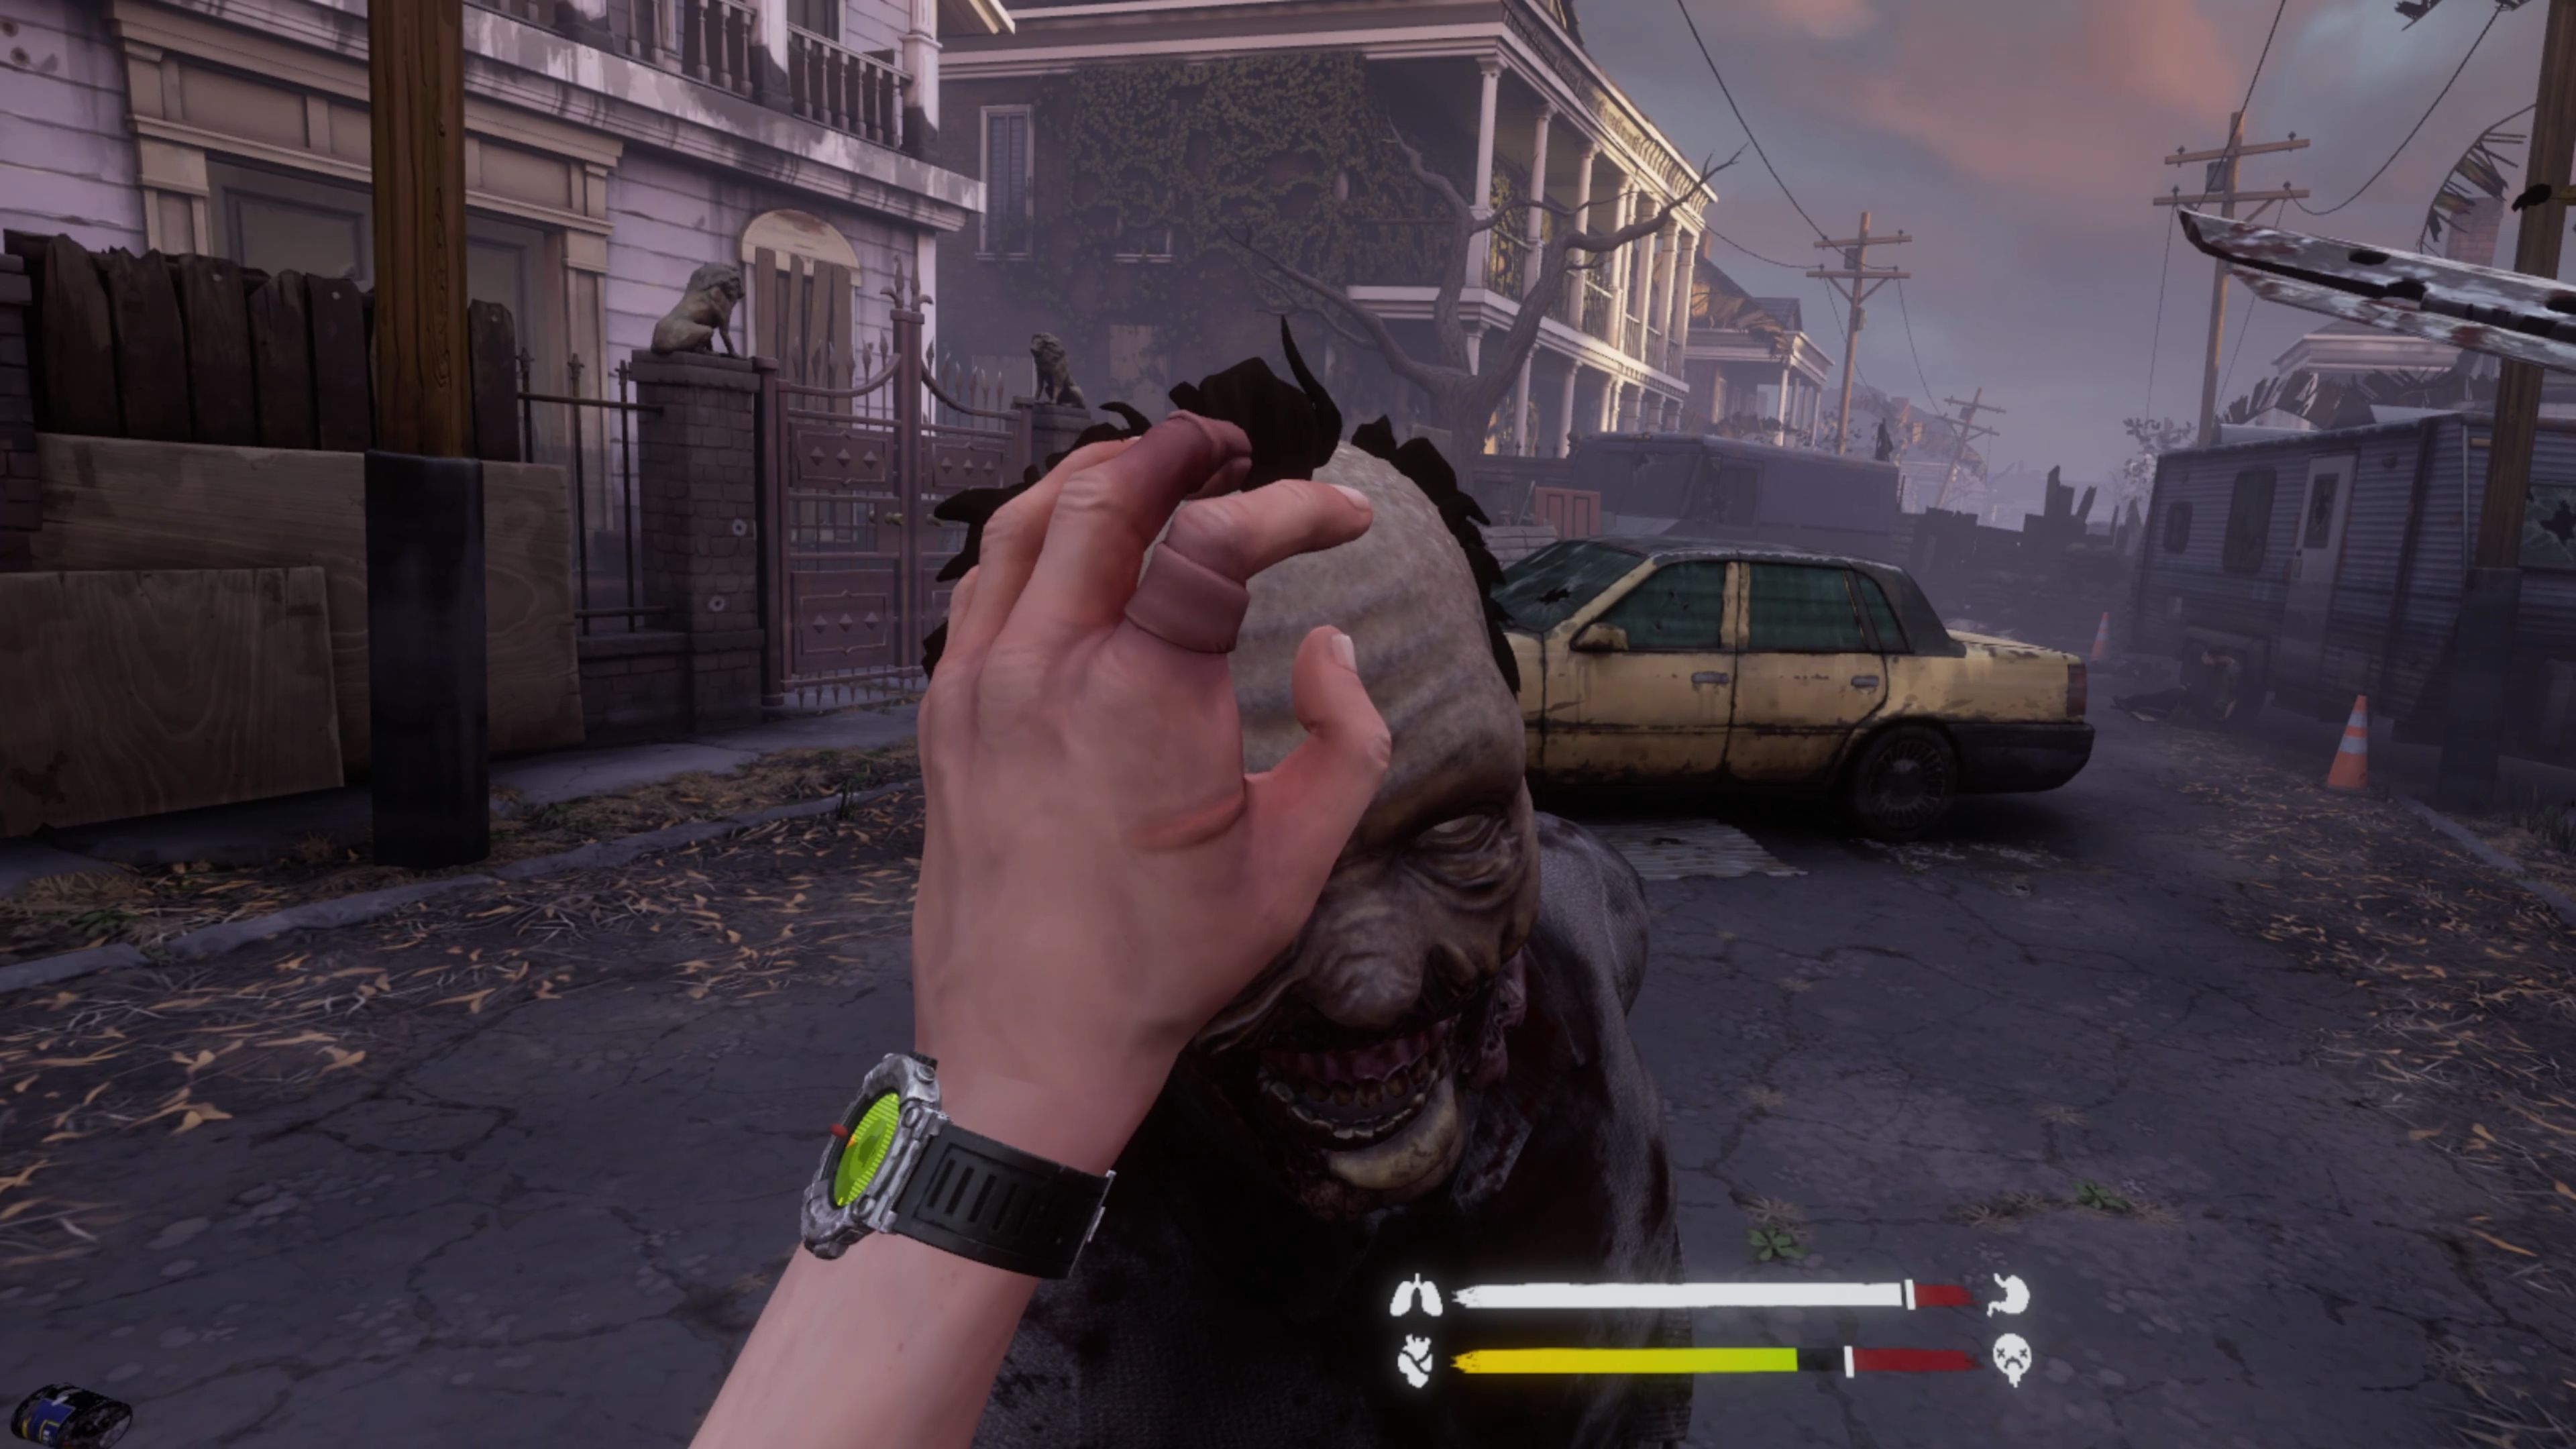 Zombie Video Game Comes To New Orleans